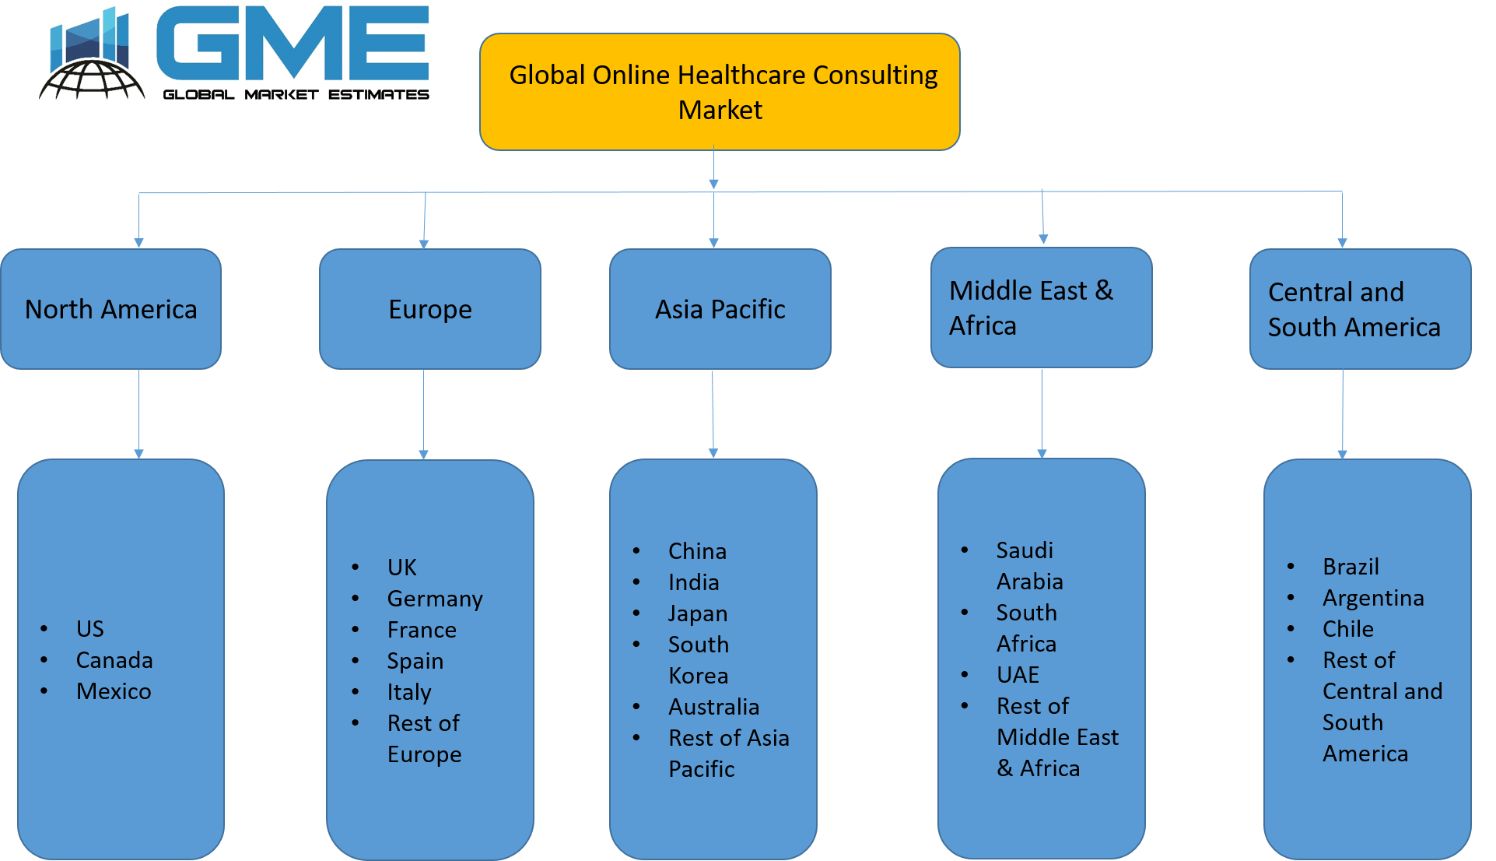 Global Online Healthcare Consulting Market - Regional Analysis